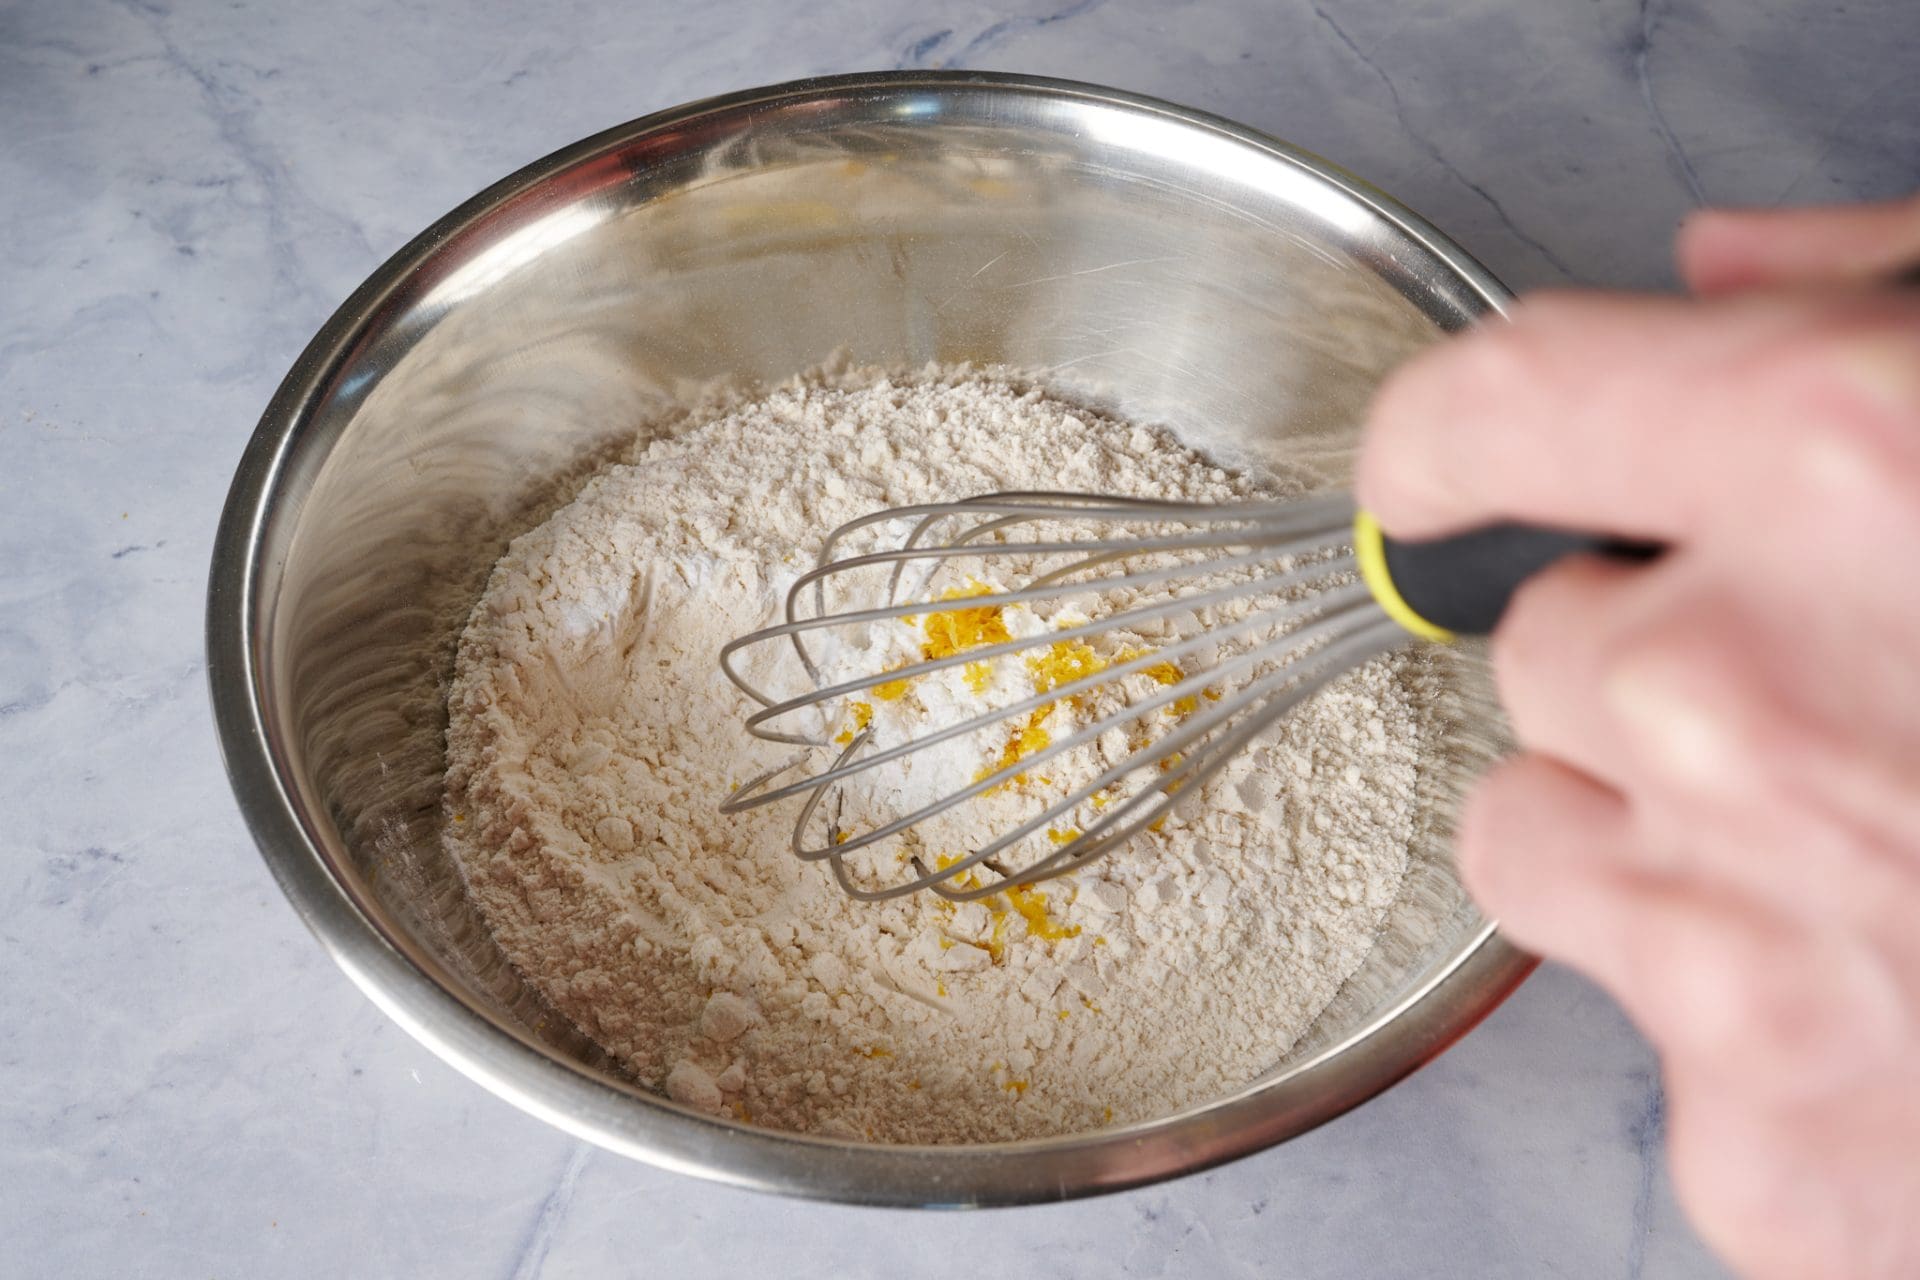 Sourdough starter discard cake step by step: Whisking flour, zest, and other ingredients.